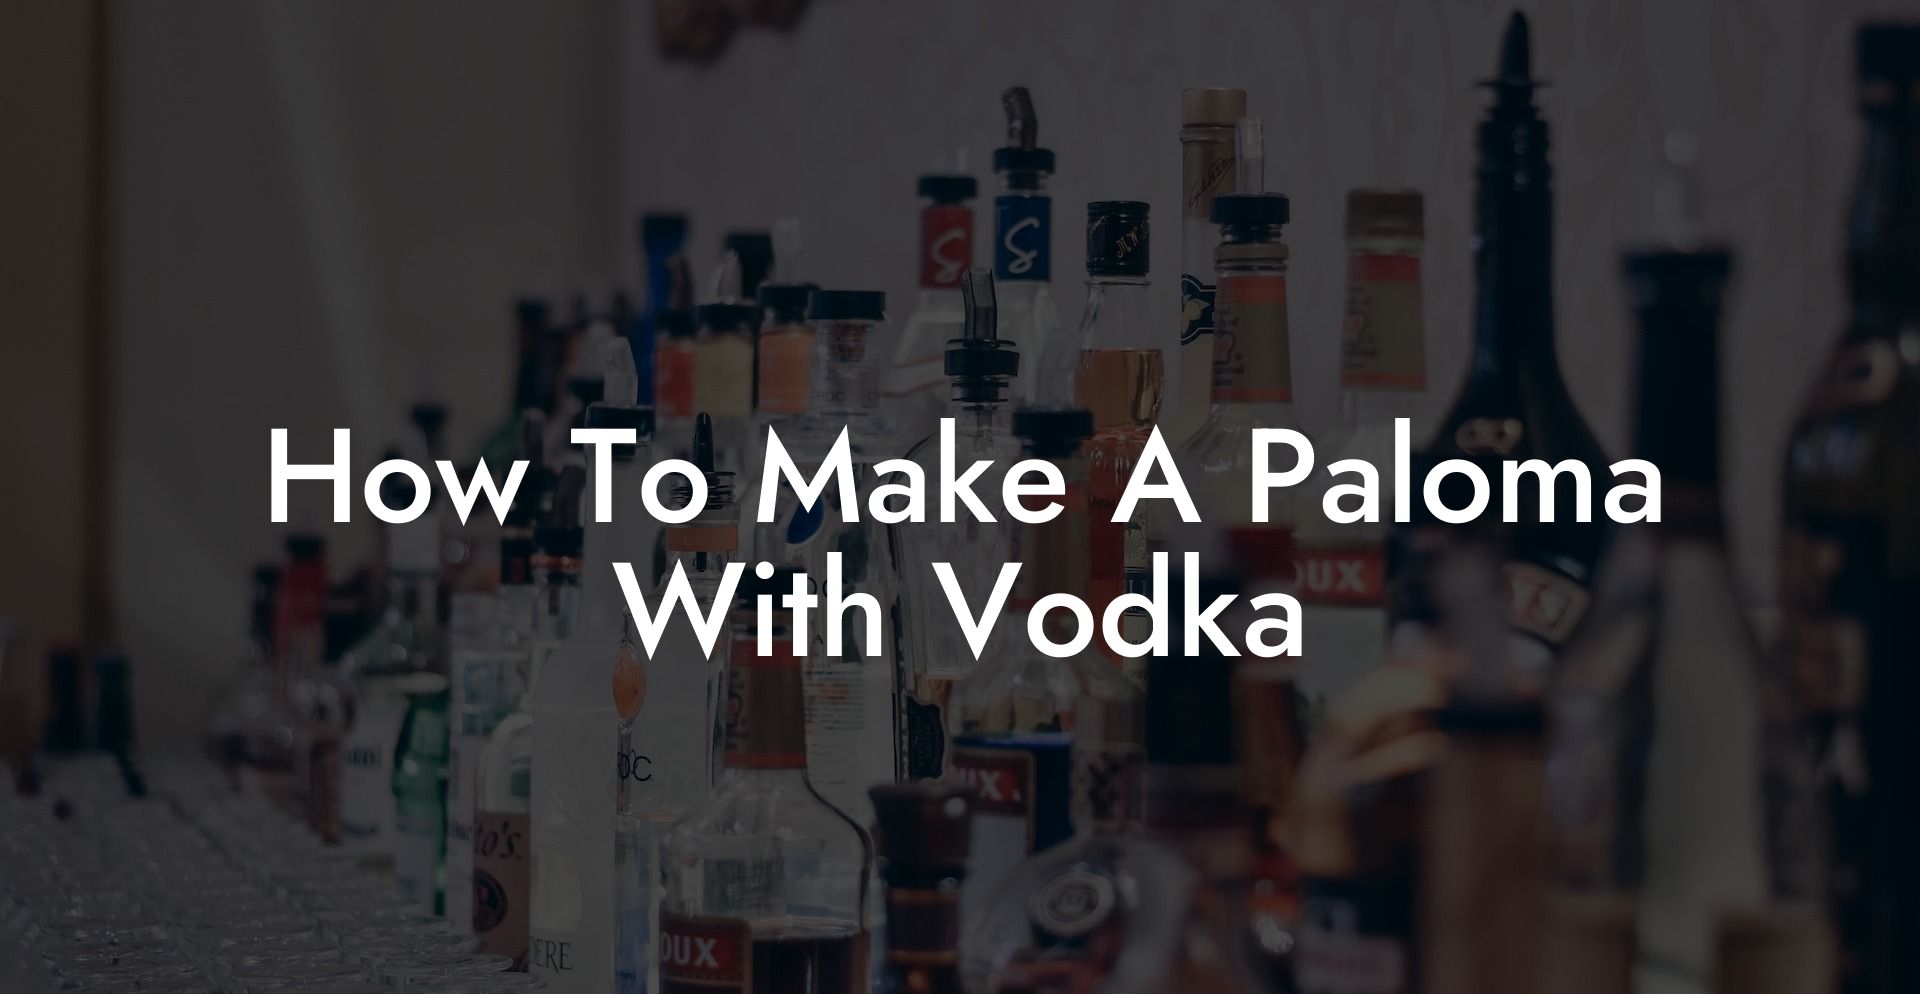 How To Make A Paloma With Vodka